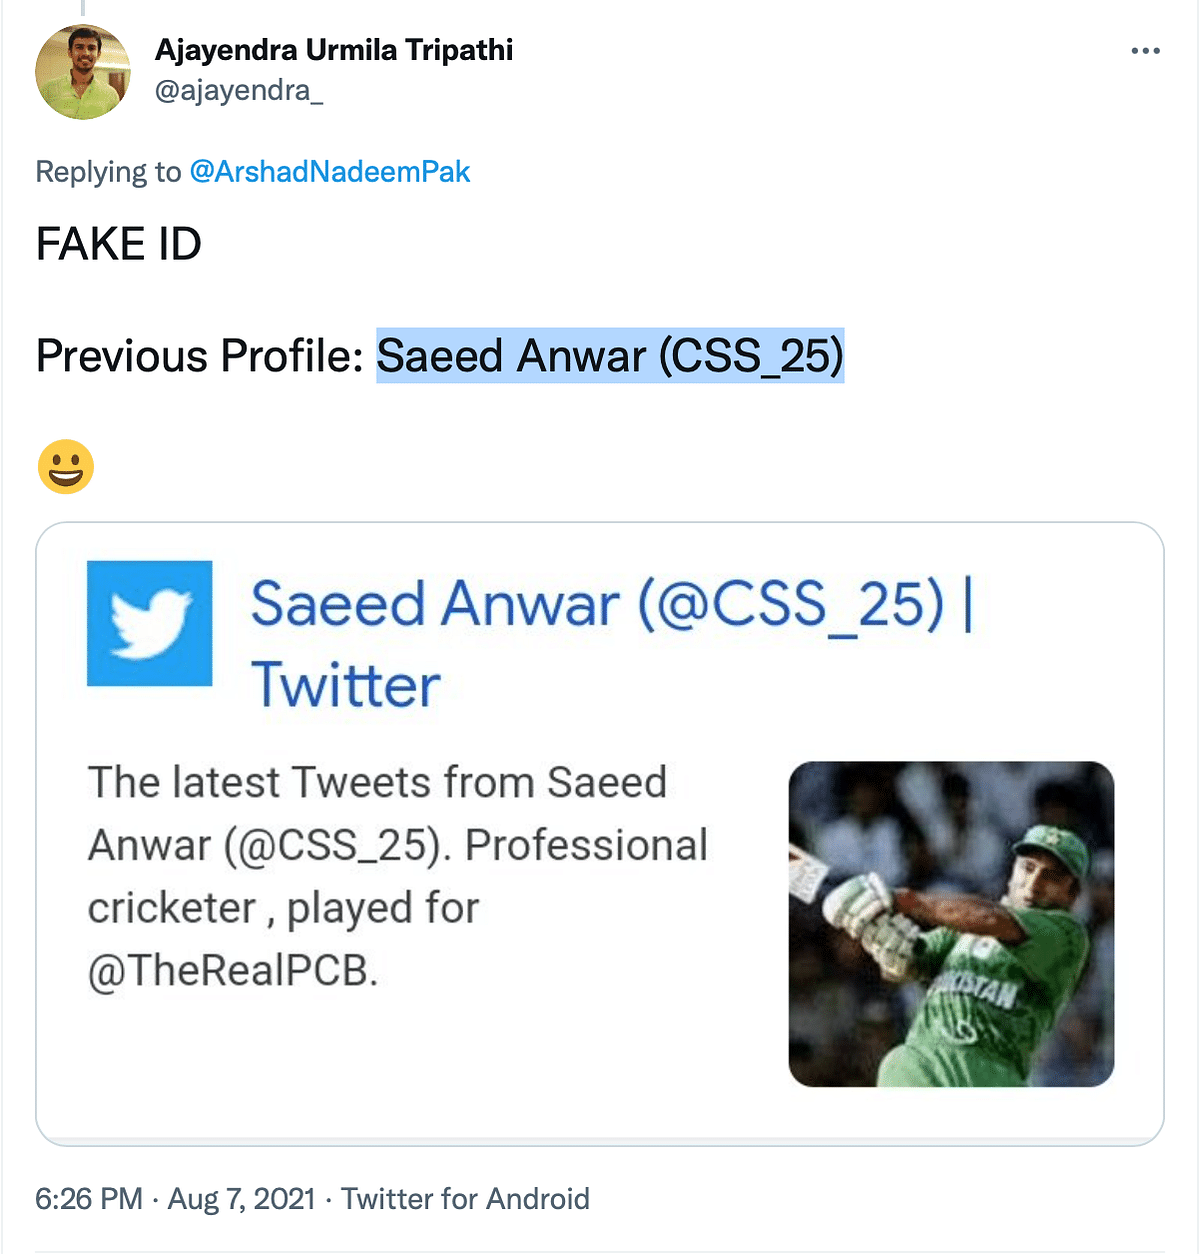 We found that the account was previously using 'Saeed Anwar' as its username and '@CSS_25' as its handle.